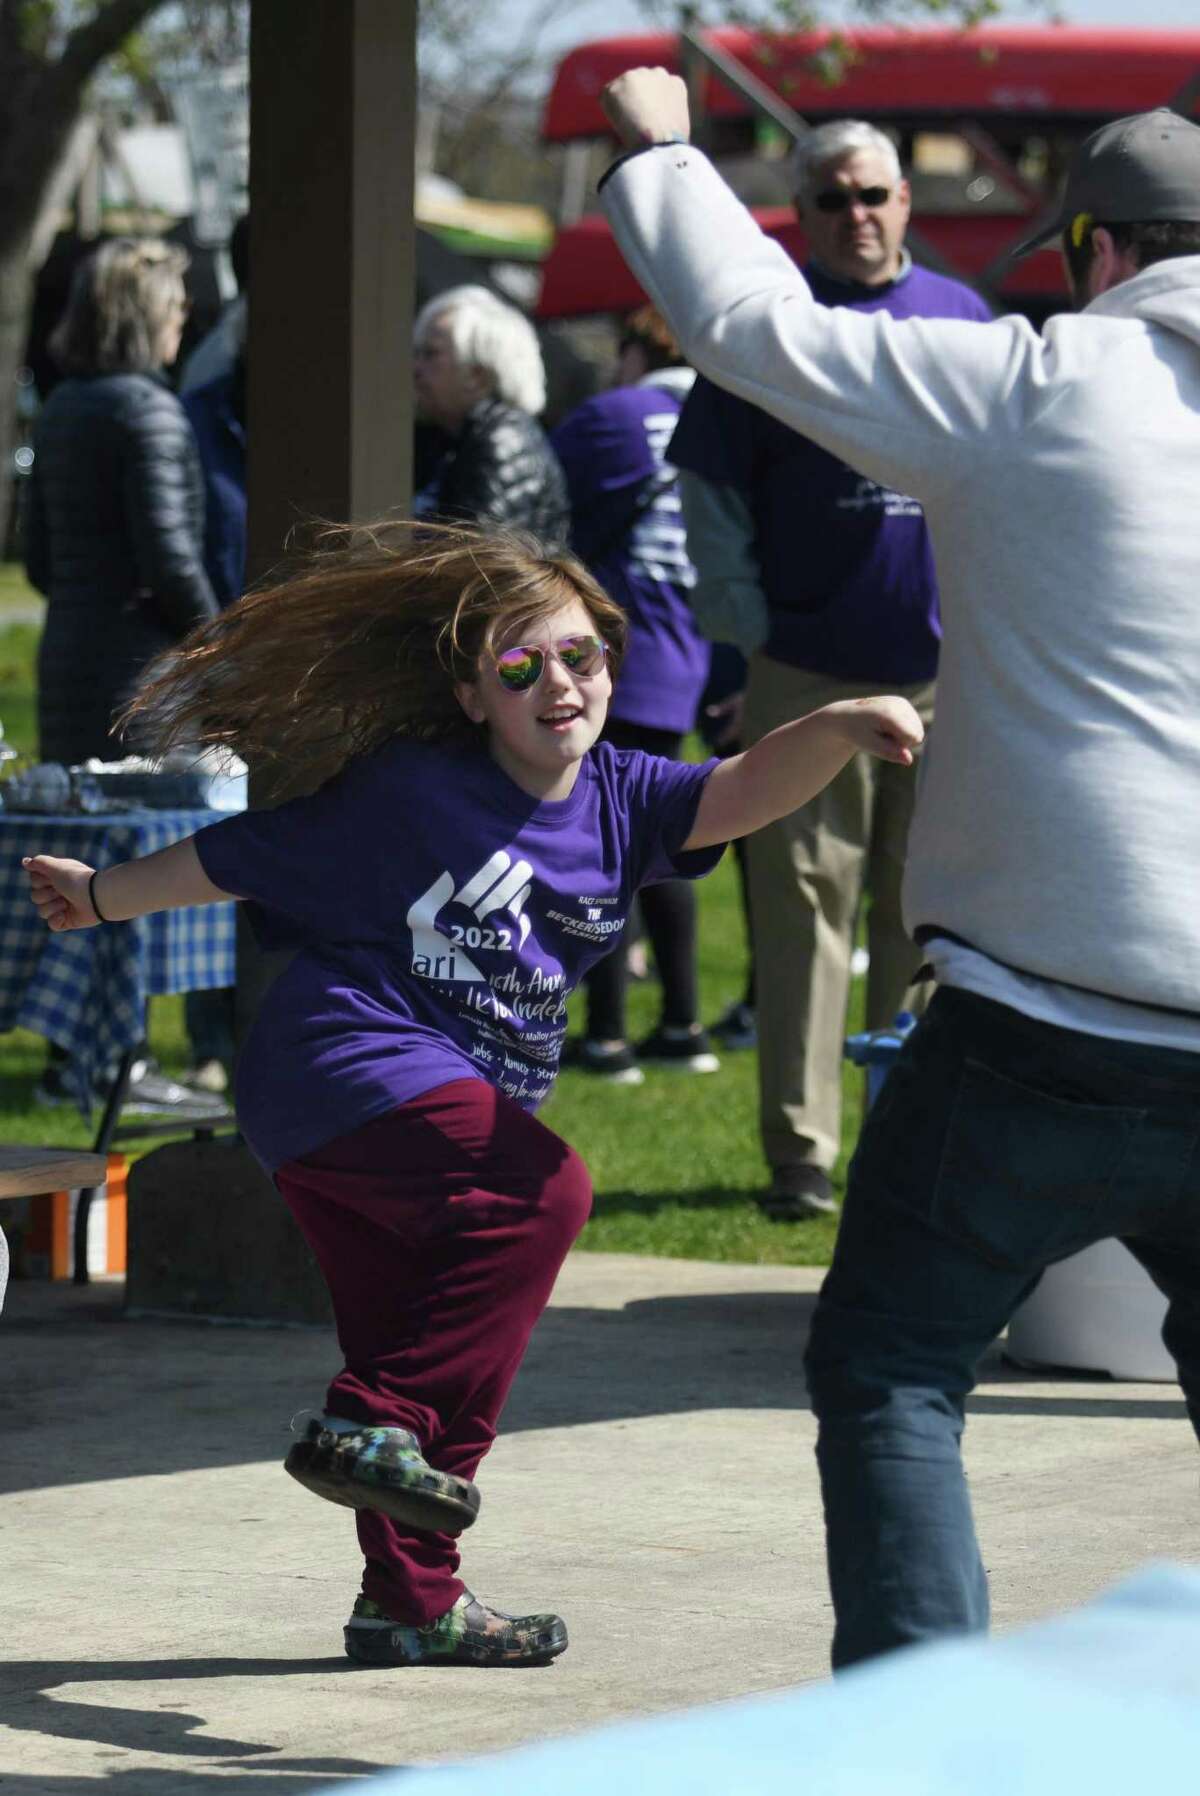 Willa Wellington, 8, of Fairfield, dances at the 16th annual ARI Walk for Independence at Cove Island Park in Stamford, Conn. Sunday, April 24, 2022. Hundreds of folks attended the walk, which serves as a fundraiser to benefit those with disabilities through employment services, housing, recreation, and clinical care. Dance With El the Ha Ha Gang clowns from Stamford Hospital were on hand to entertain before the walk.